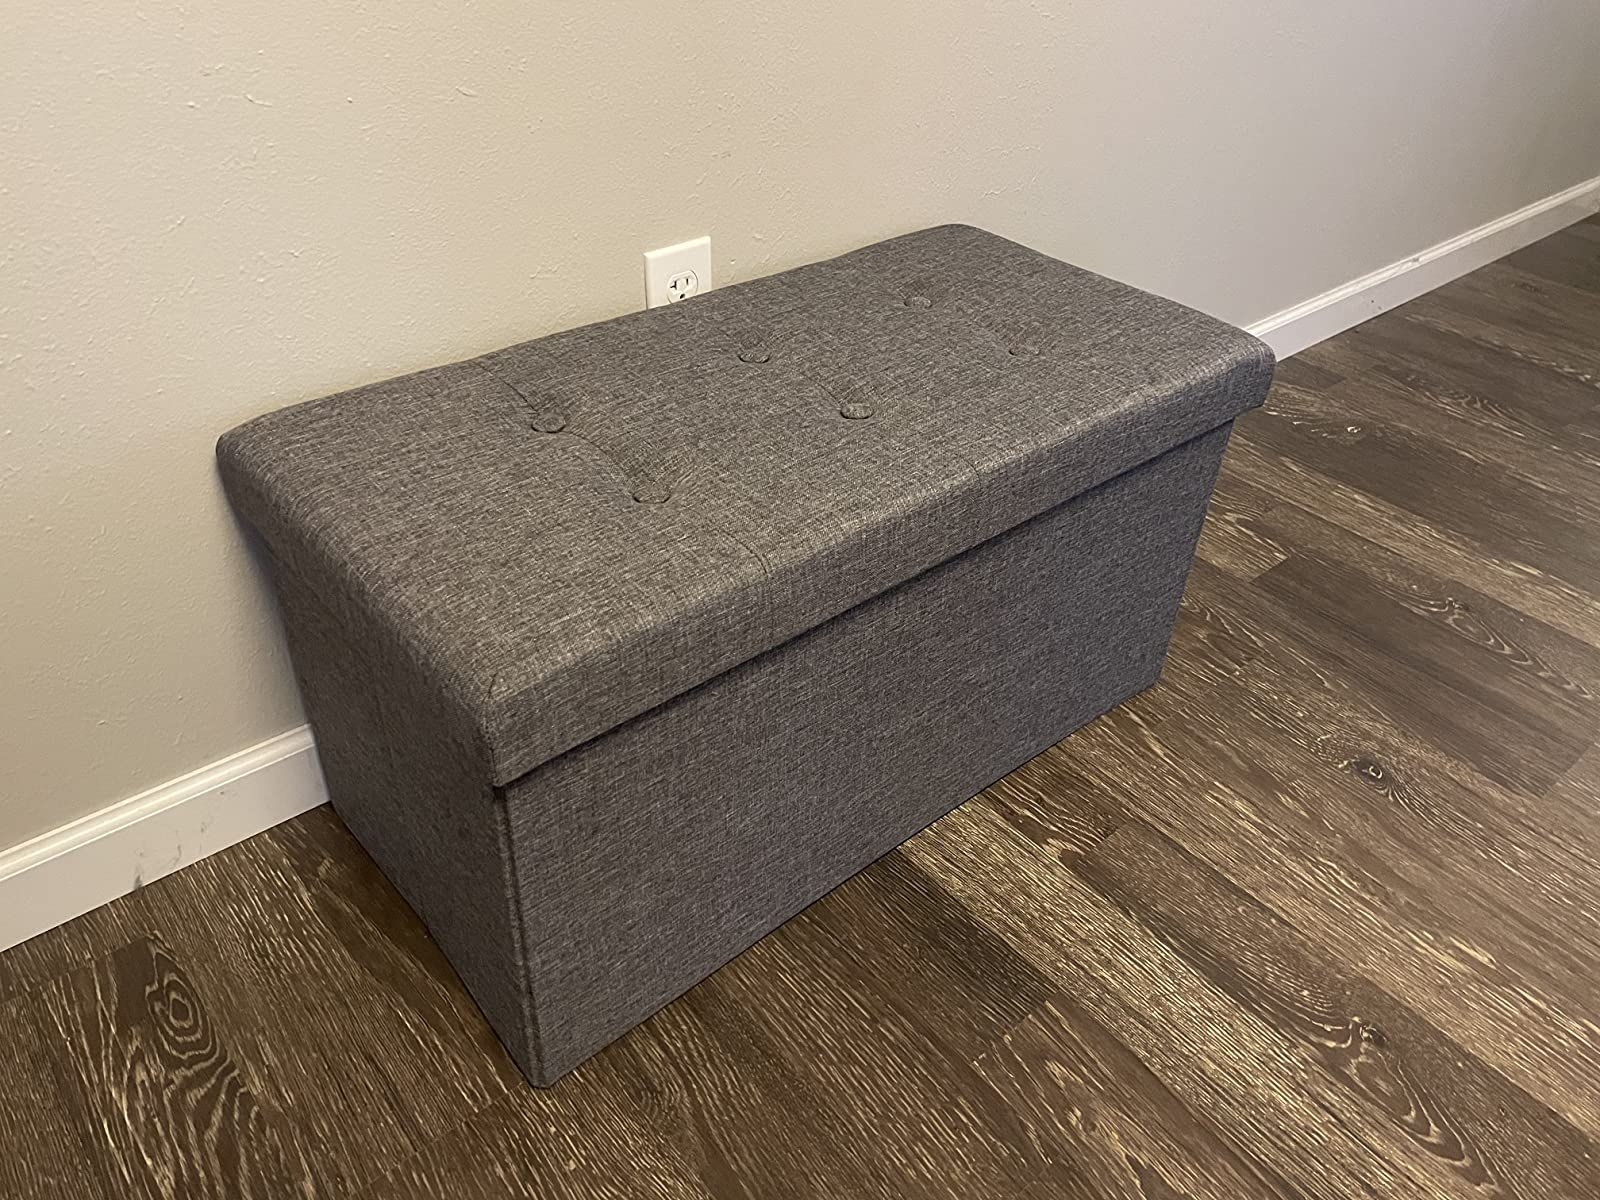 The rectangular tufted bench in an entryway